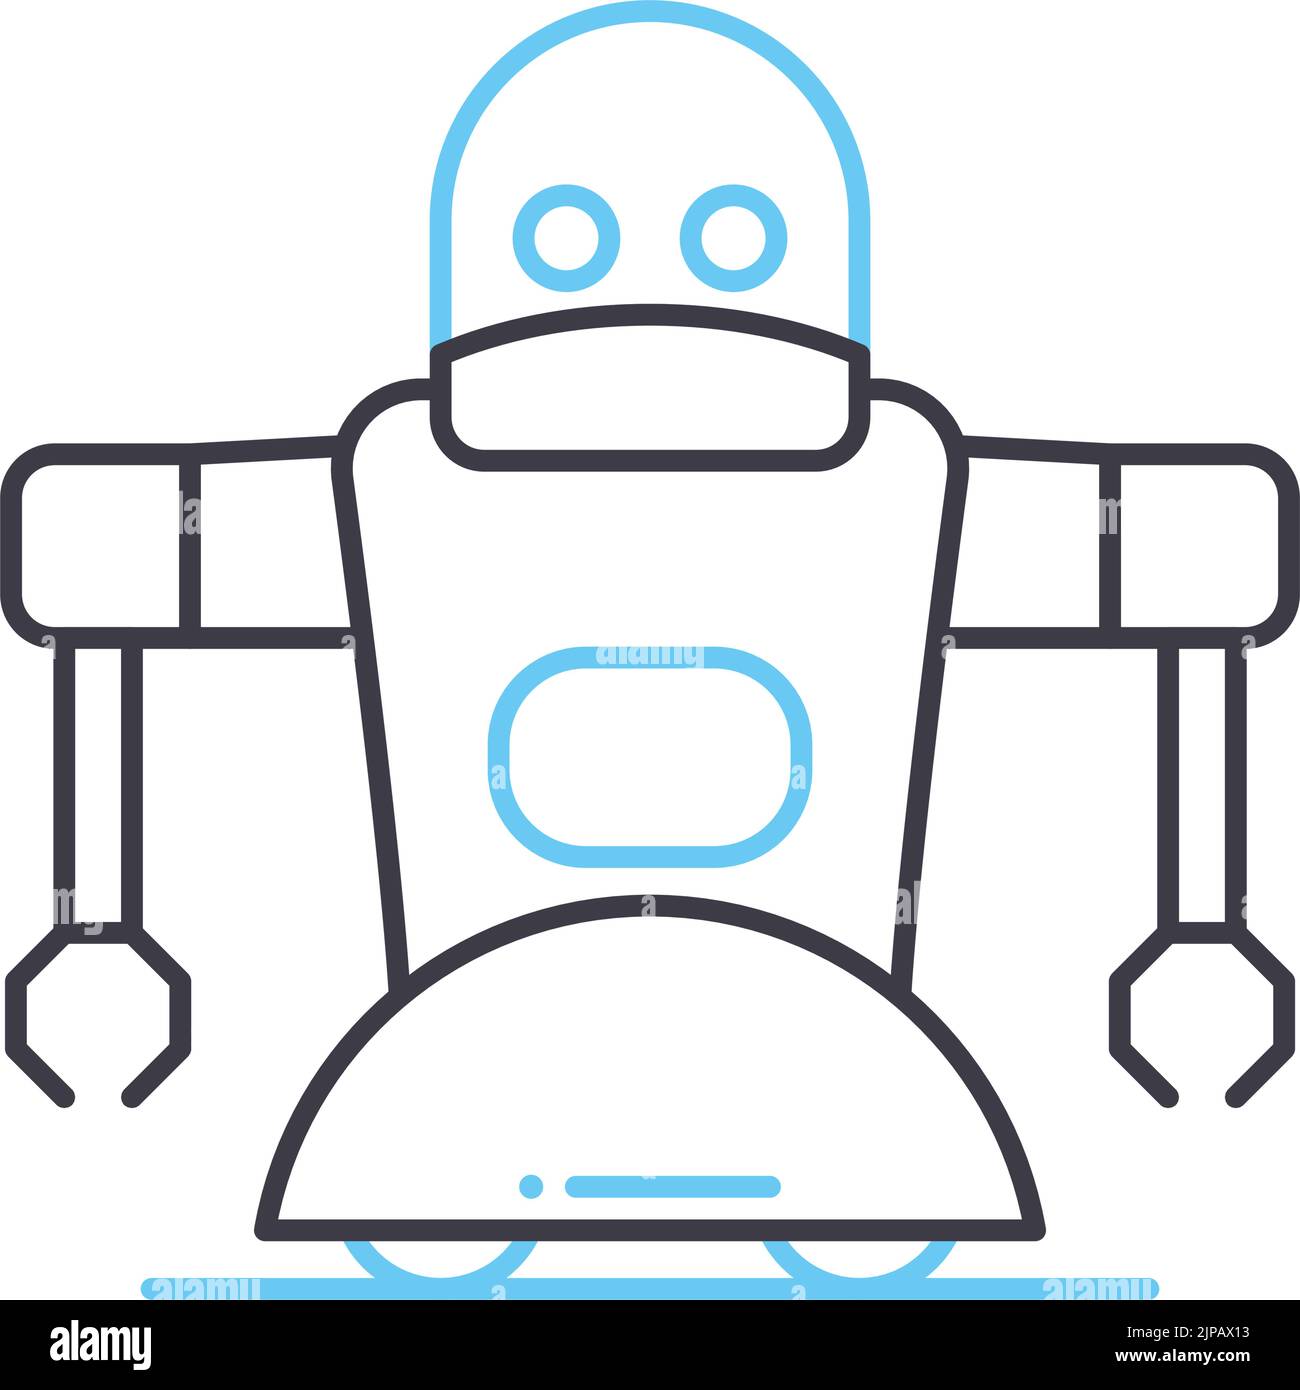 robot line icon, outline symbol, vector illustration, concept sign Stock Vector